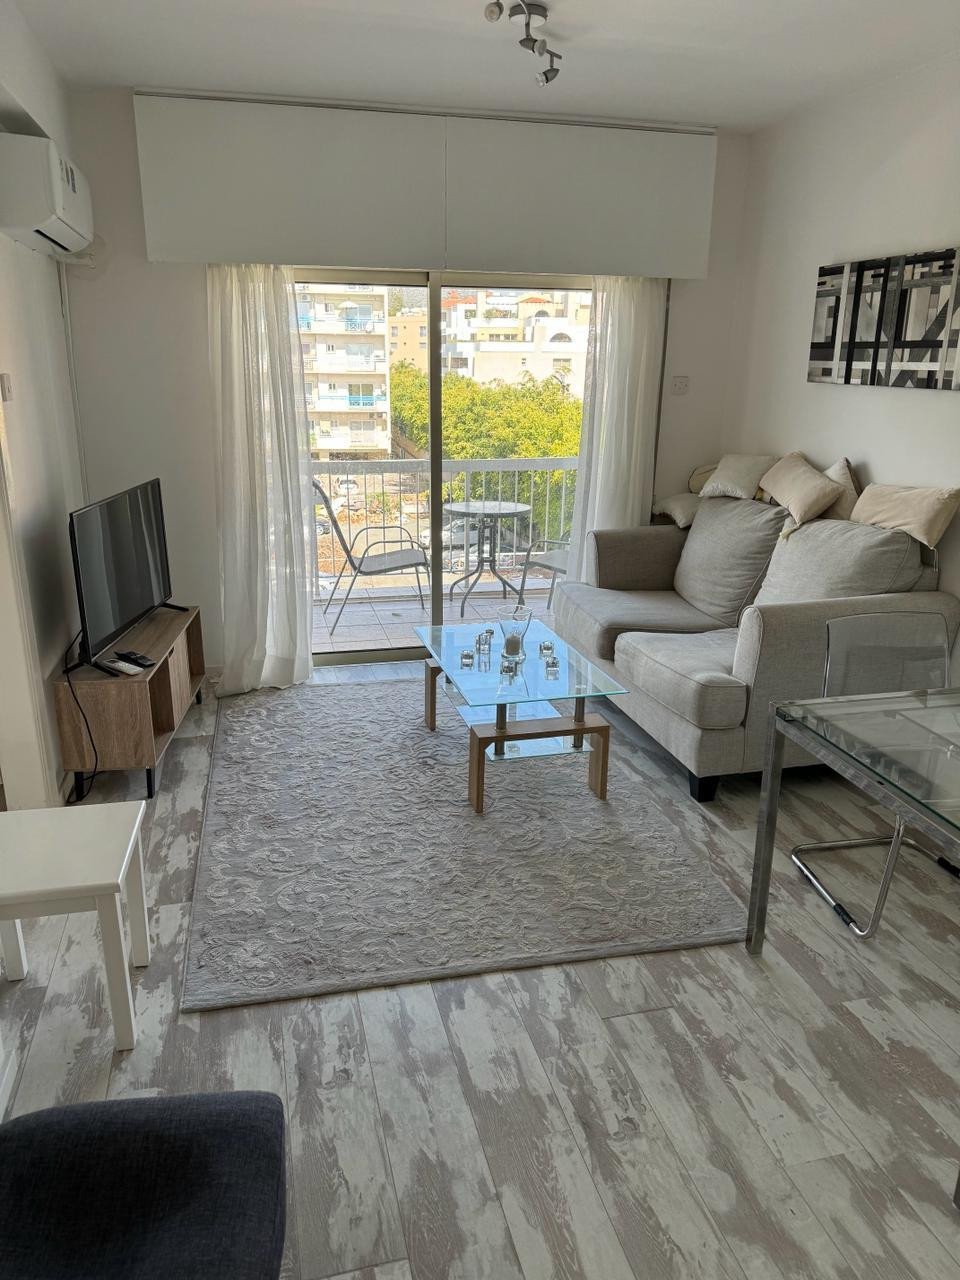 Property for Rent: Apartment (Flat) in Germasoyia Tourist Area, Limassol for Rent | Key Realtor Cyprus